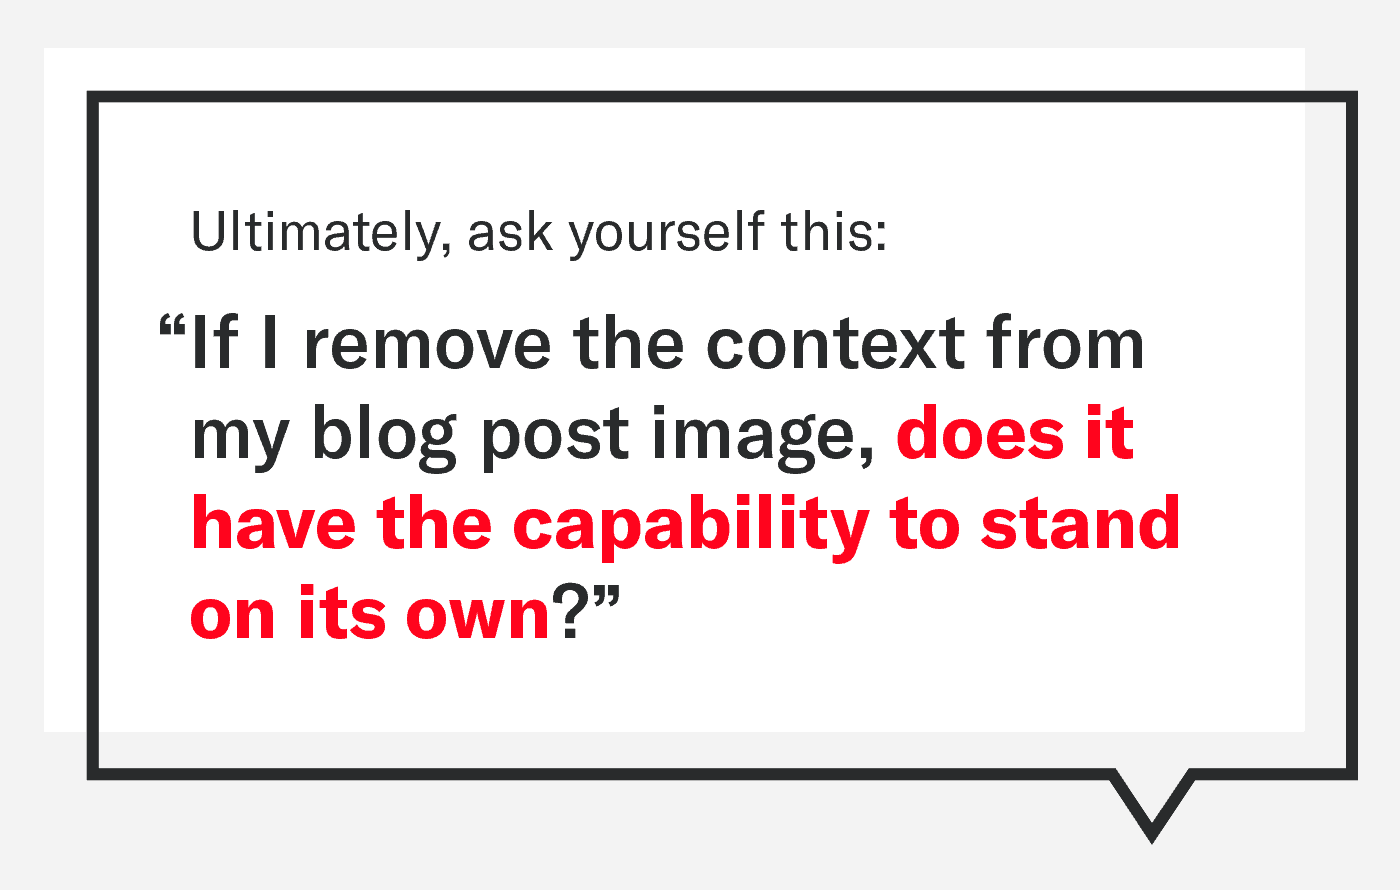 pull quote about blog post image context